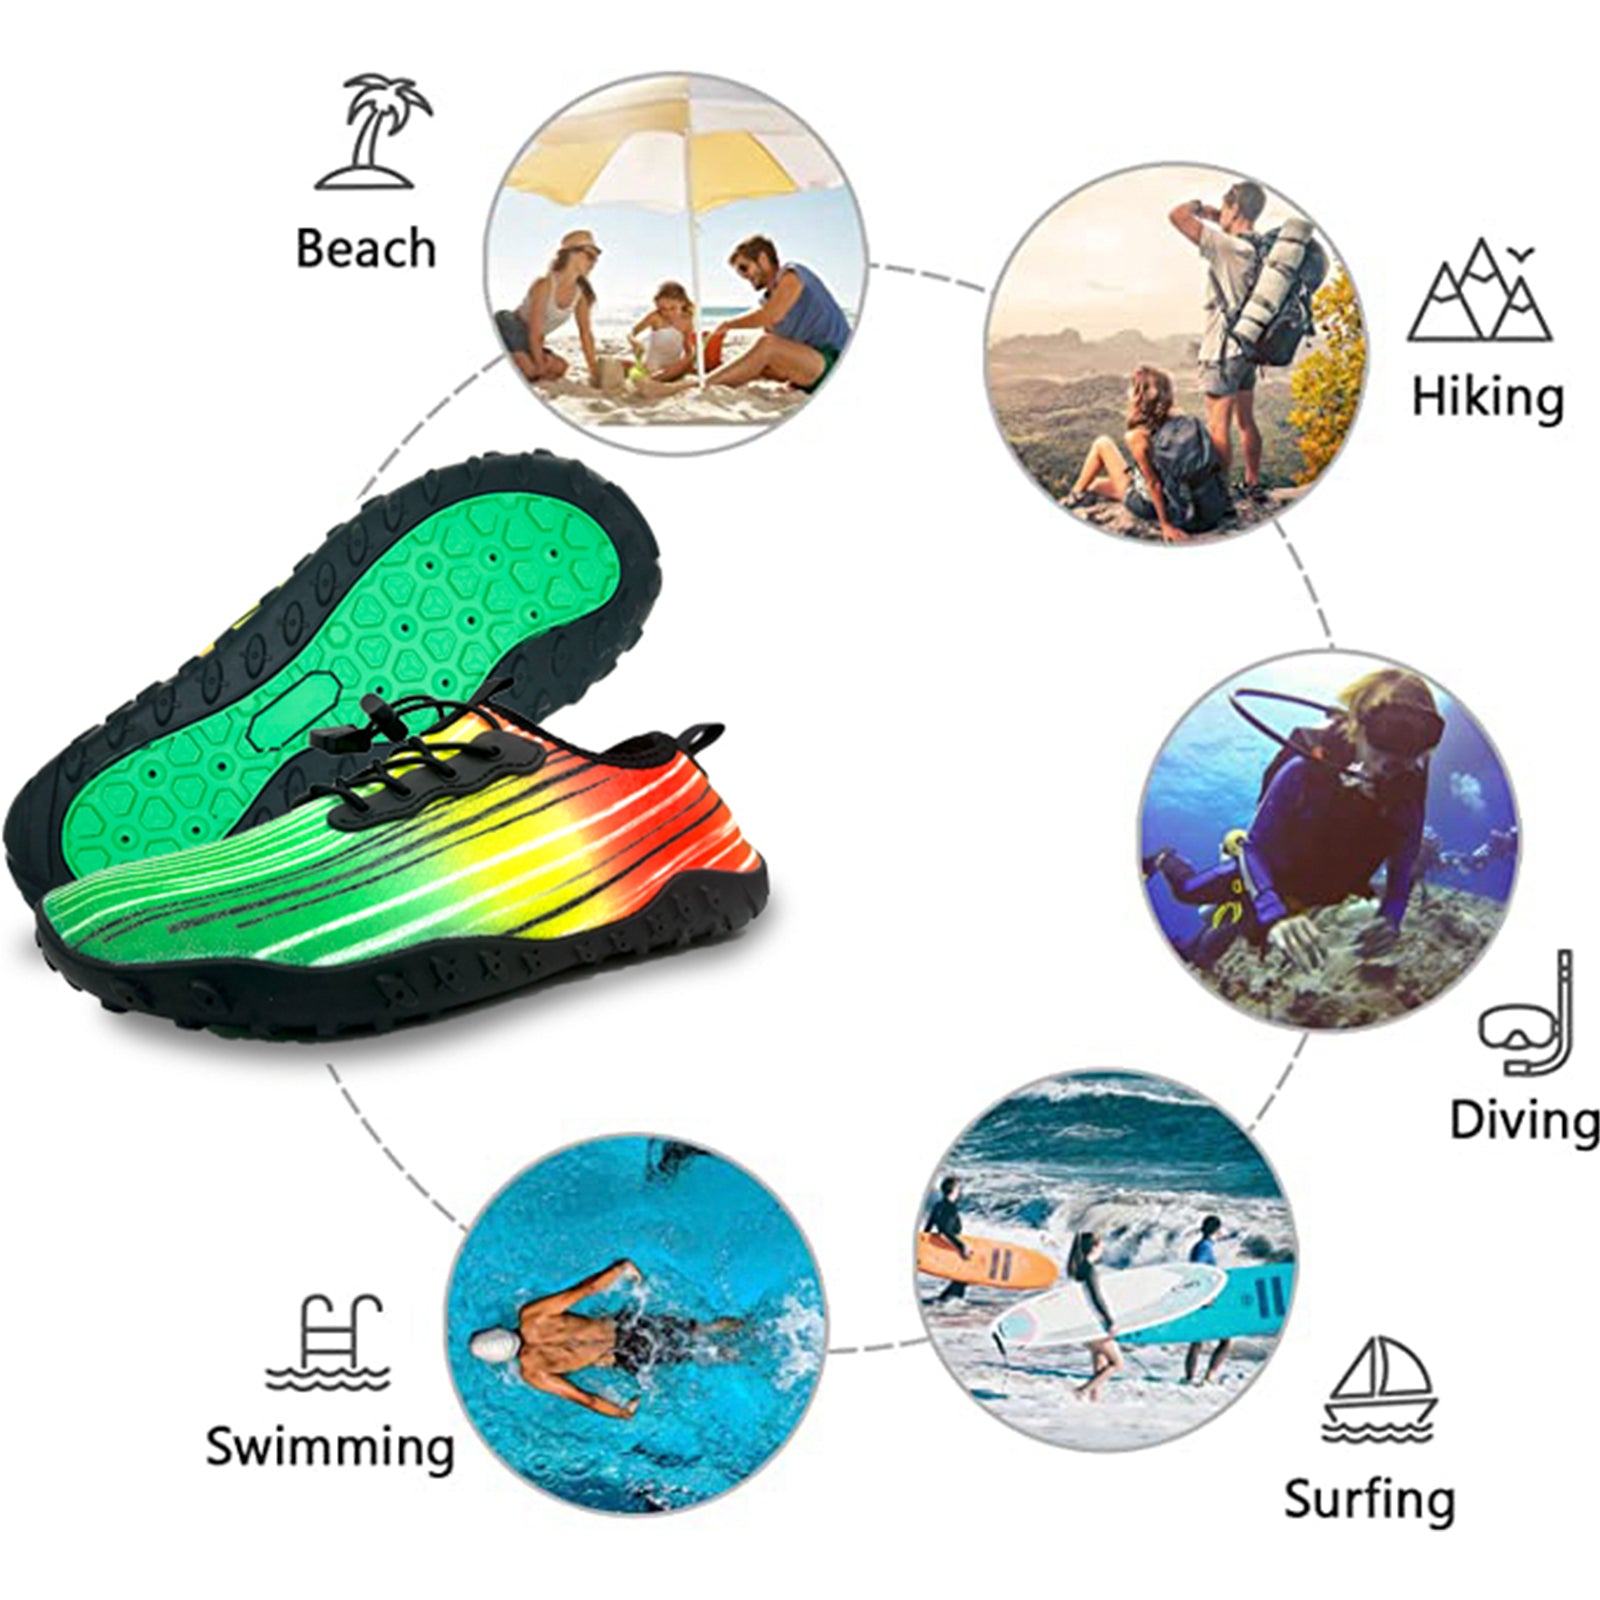 Water Shoes for Men and Women Soft Breathable Slip-on Aqua Shoes Aqua Socks for Swim Beach Pool Surf Yoga (Green Size US 8.5) from Deals499 at Deals499